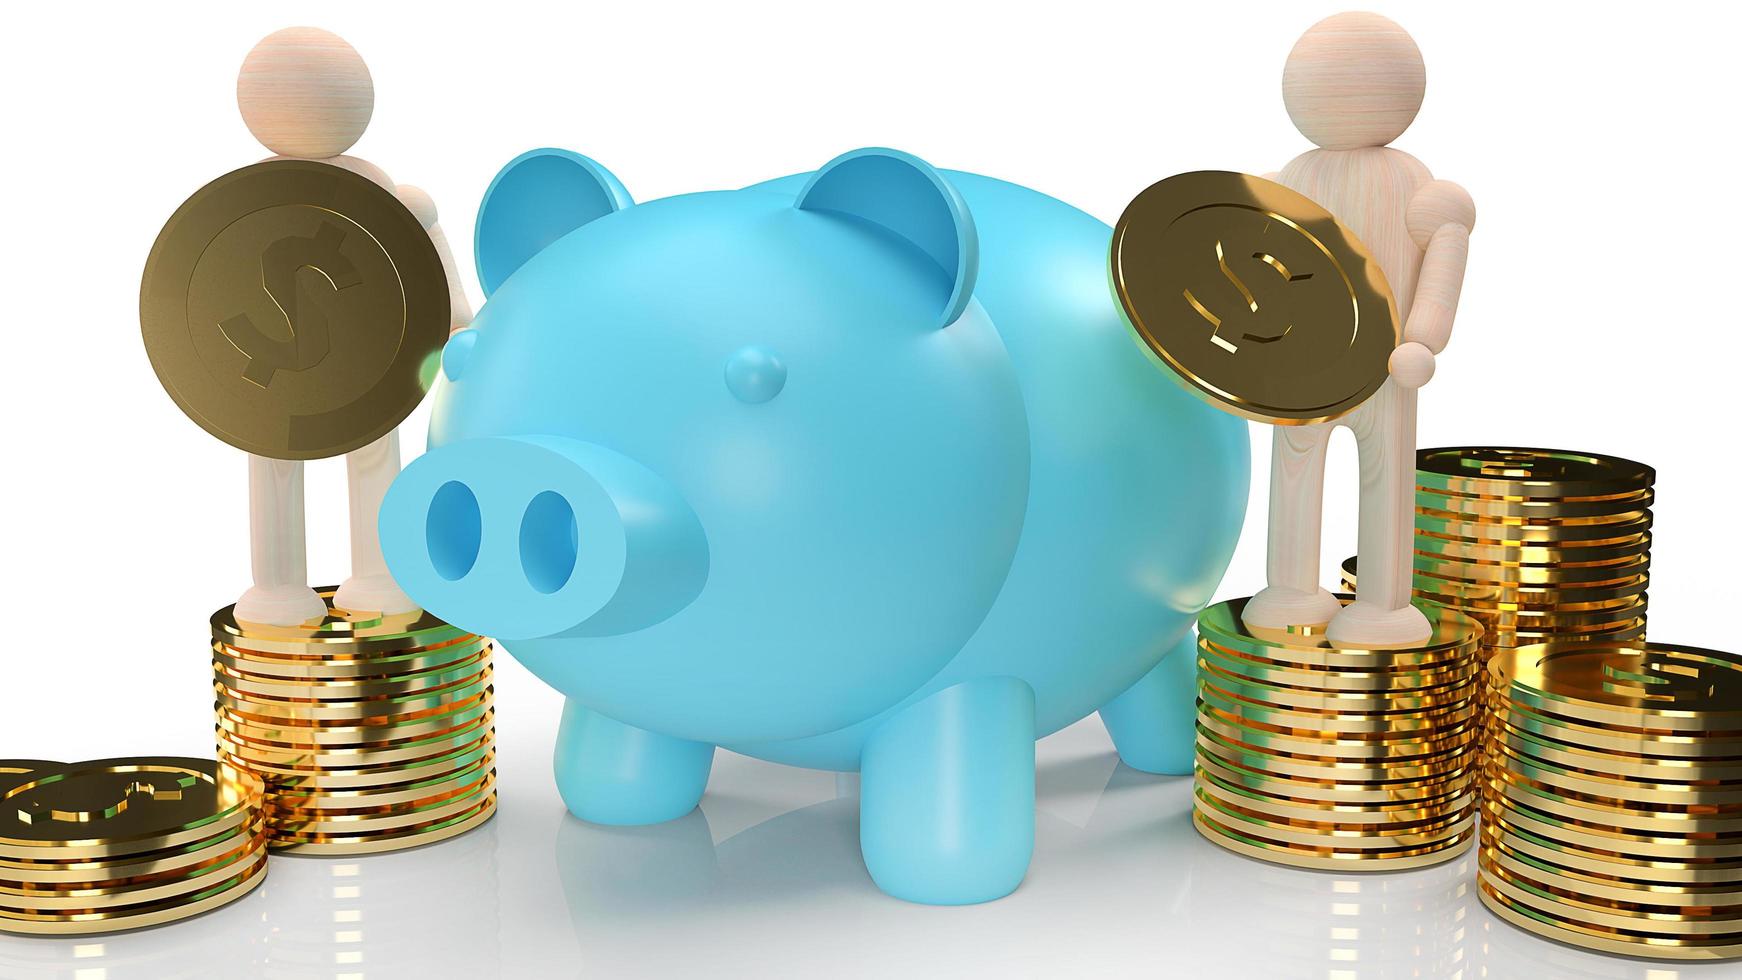 blue piggy bank and wood figure hold gold coins for business content 3d rendering. photo